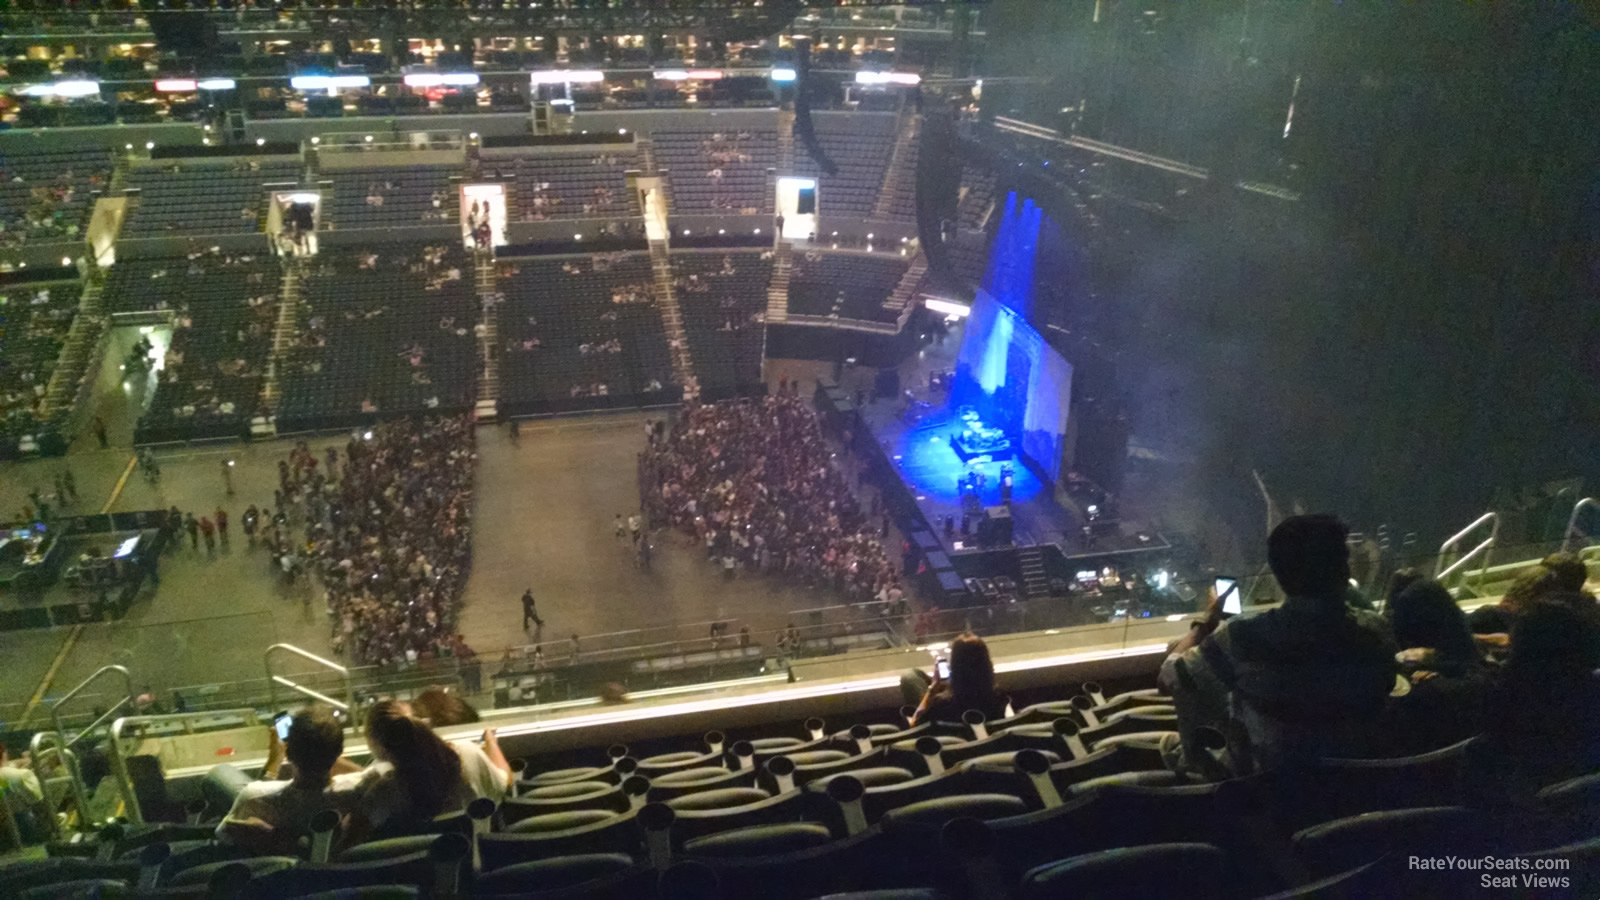 Staples Center Section 334 Concert Seating - RateYourSeats.com1600 x 900